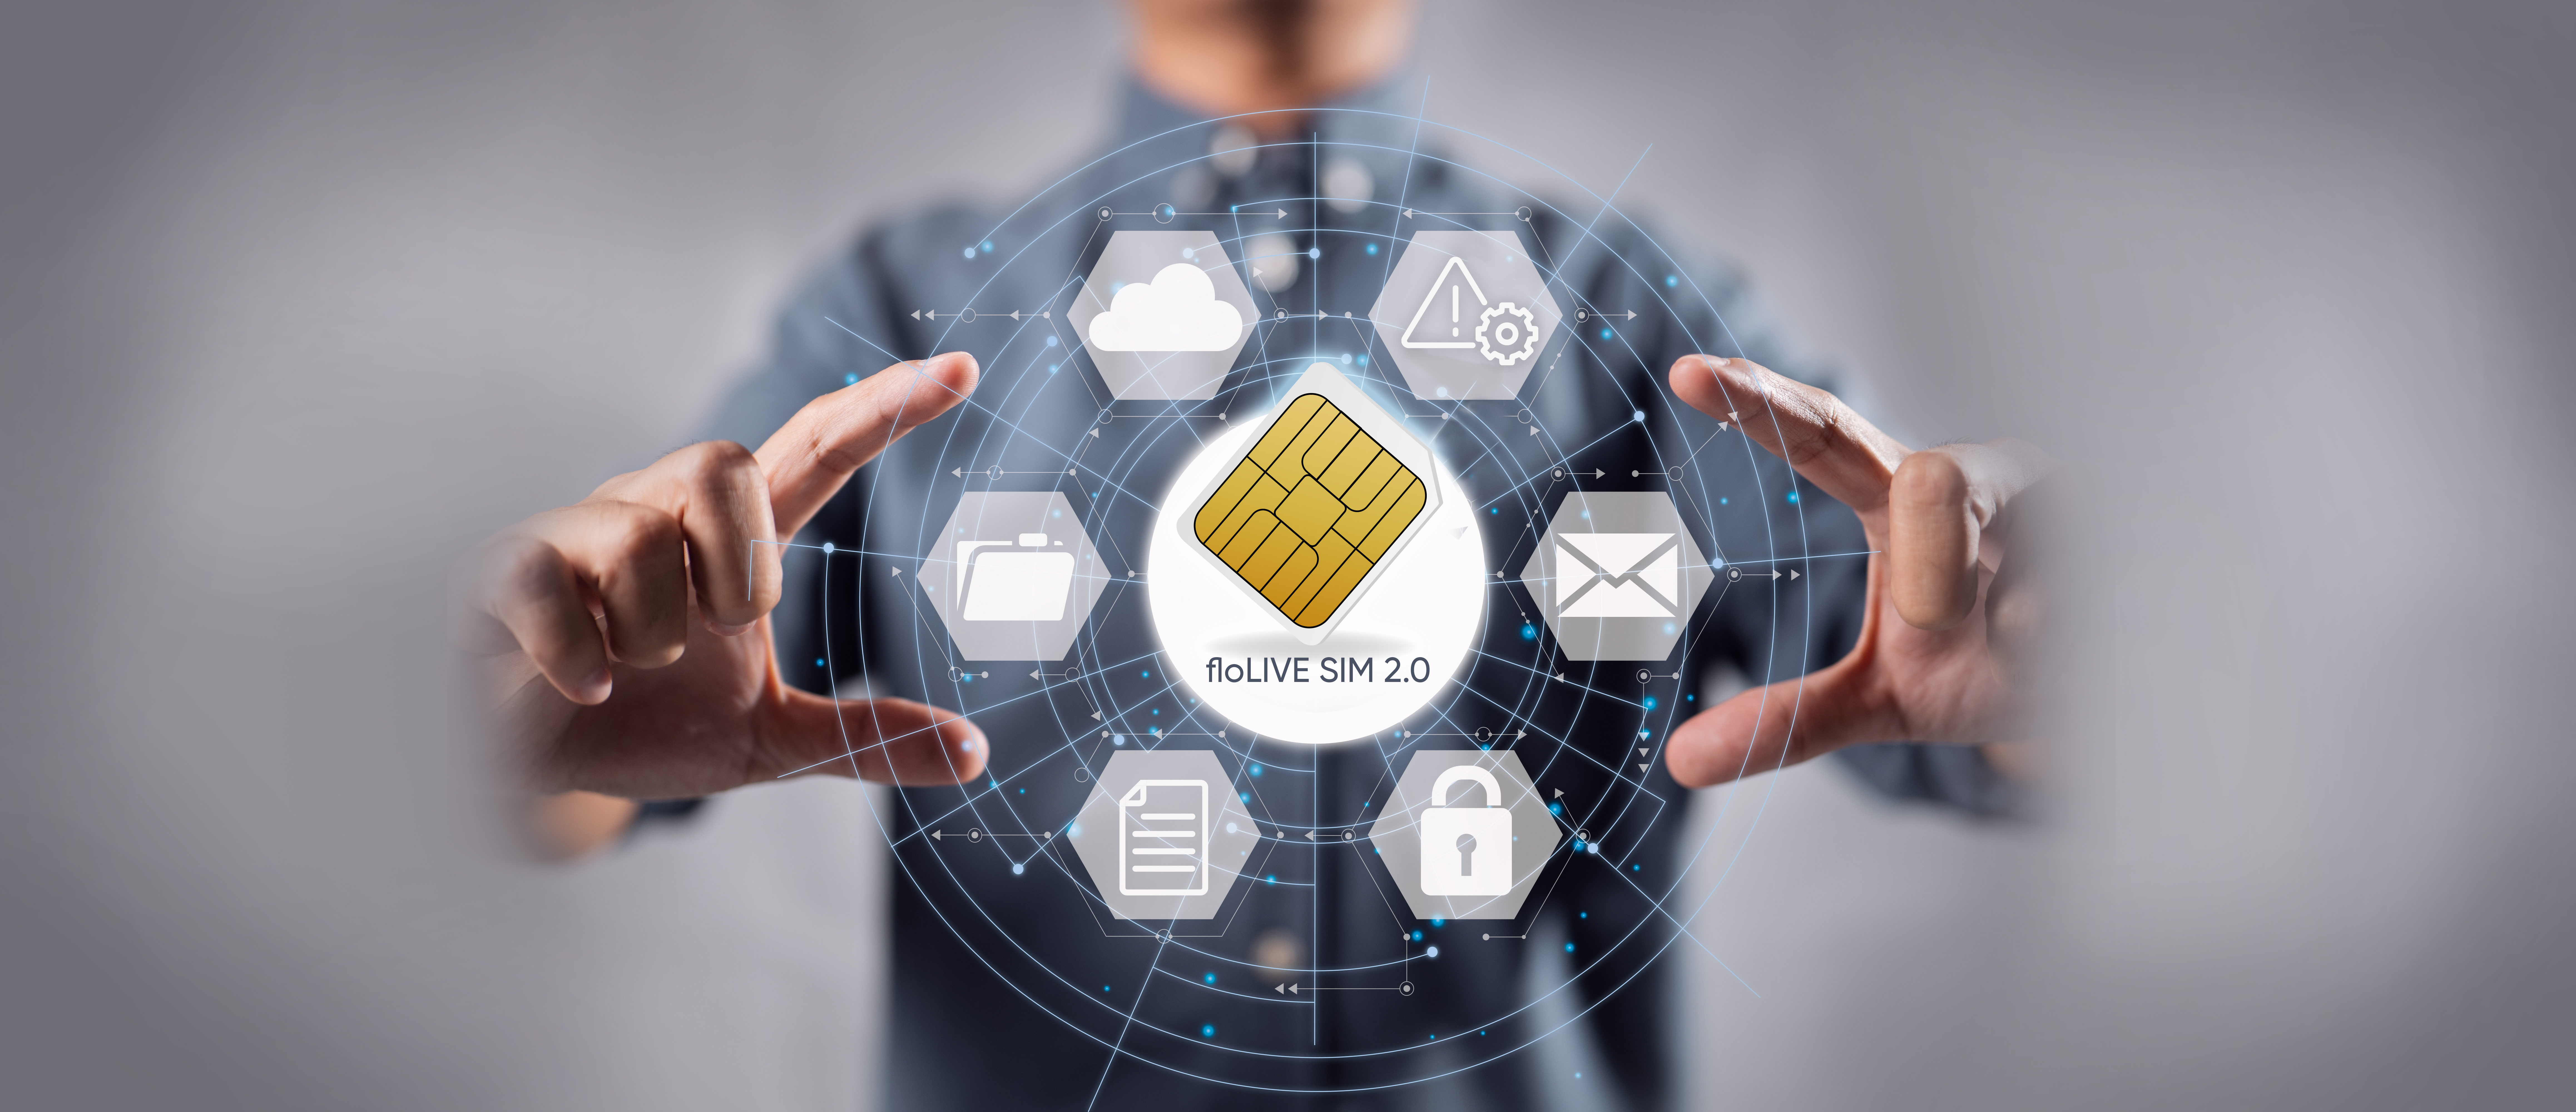 floLIVE SIM 2.0 a more secure way to do iot connectivity